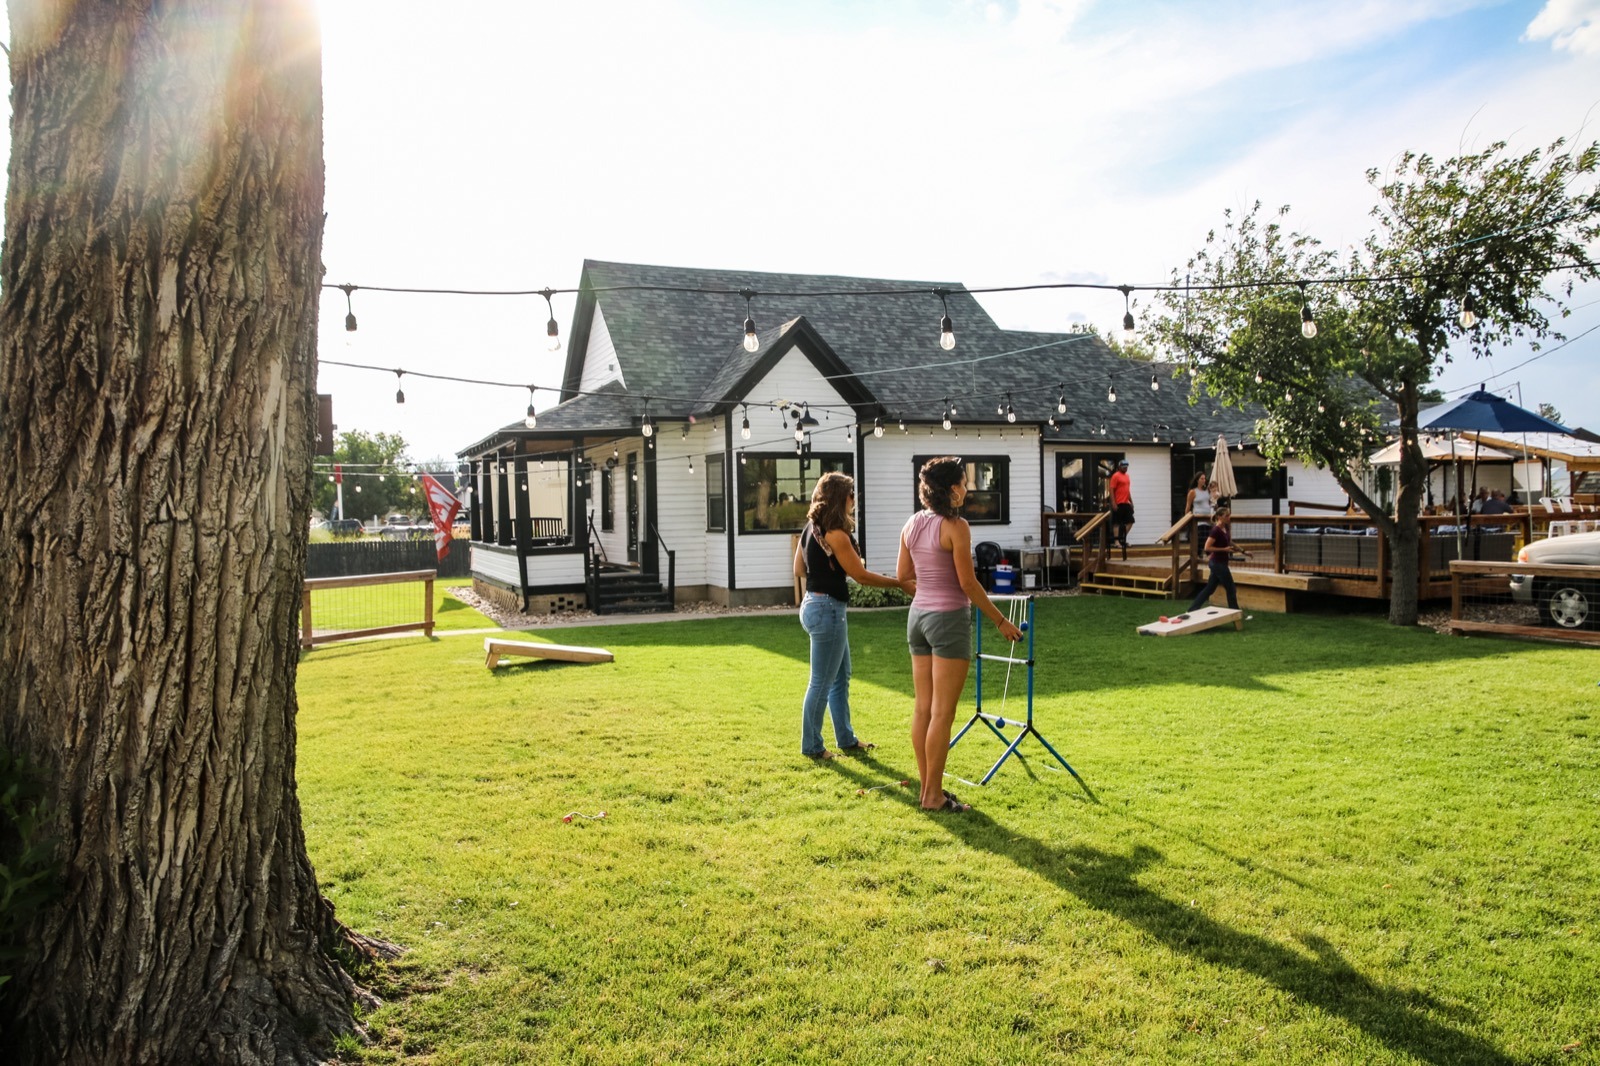 Firewater Public House is a great escape from reality, especially with yard games!